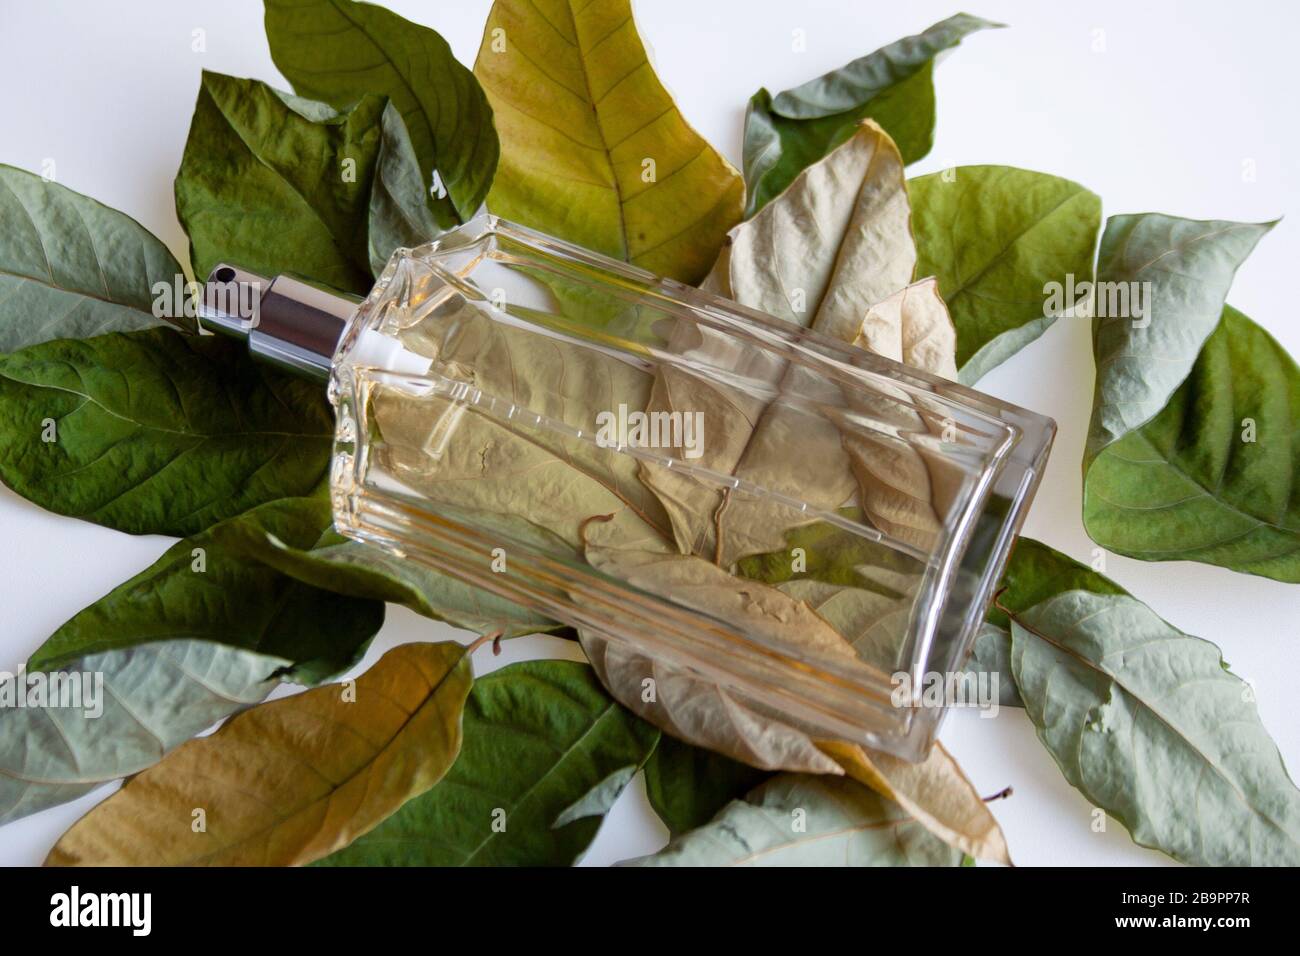 Transparent glass perfume bottle on dry green and yellow leaves Stock Photo